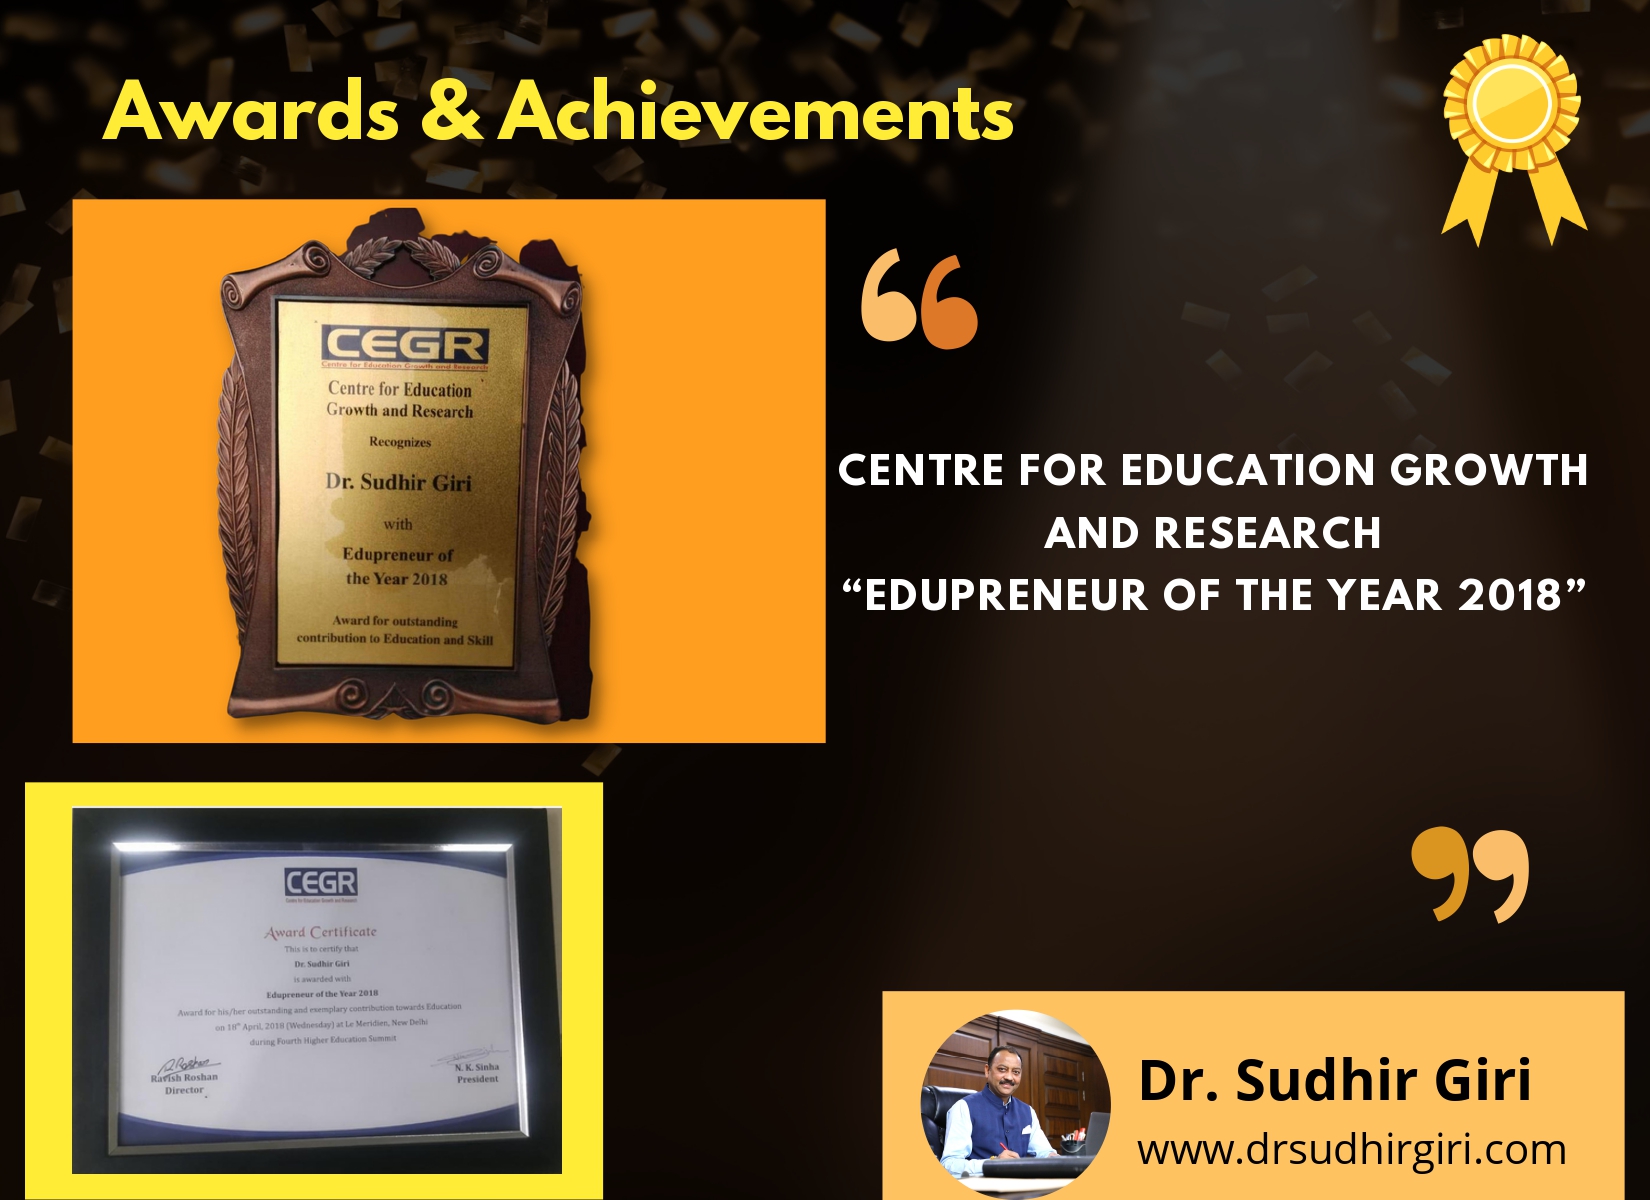 Dr Sudhir Giri - Centre for Education Growth and Research “Edupreneur of the Year 2018”